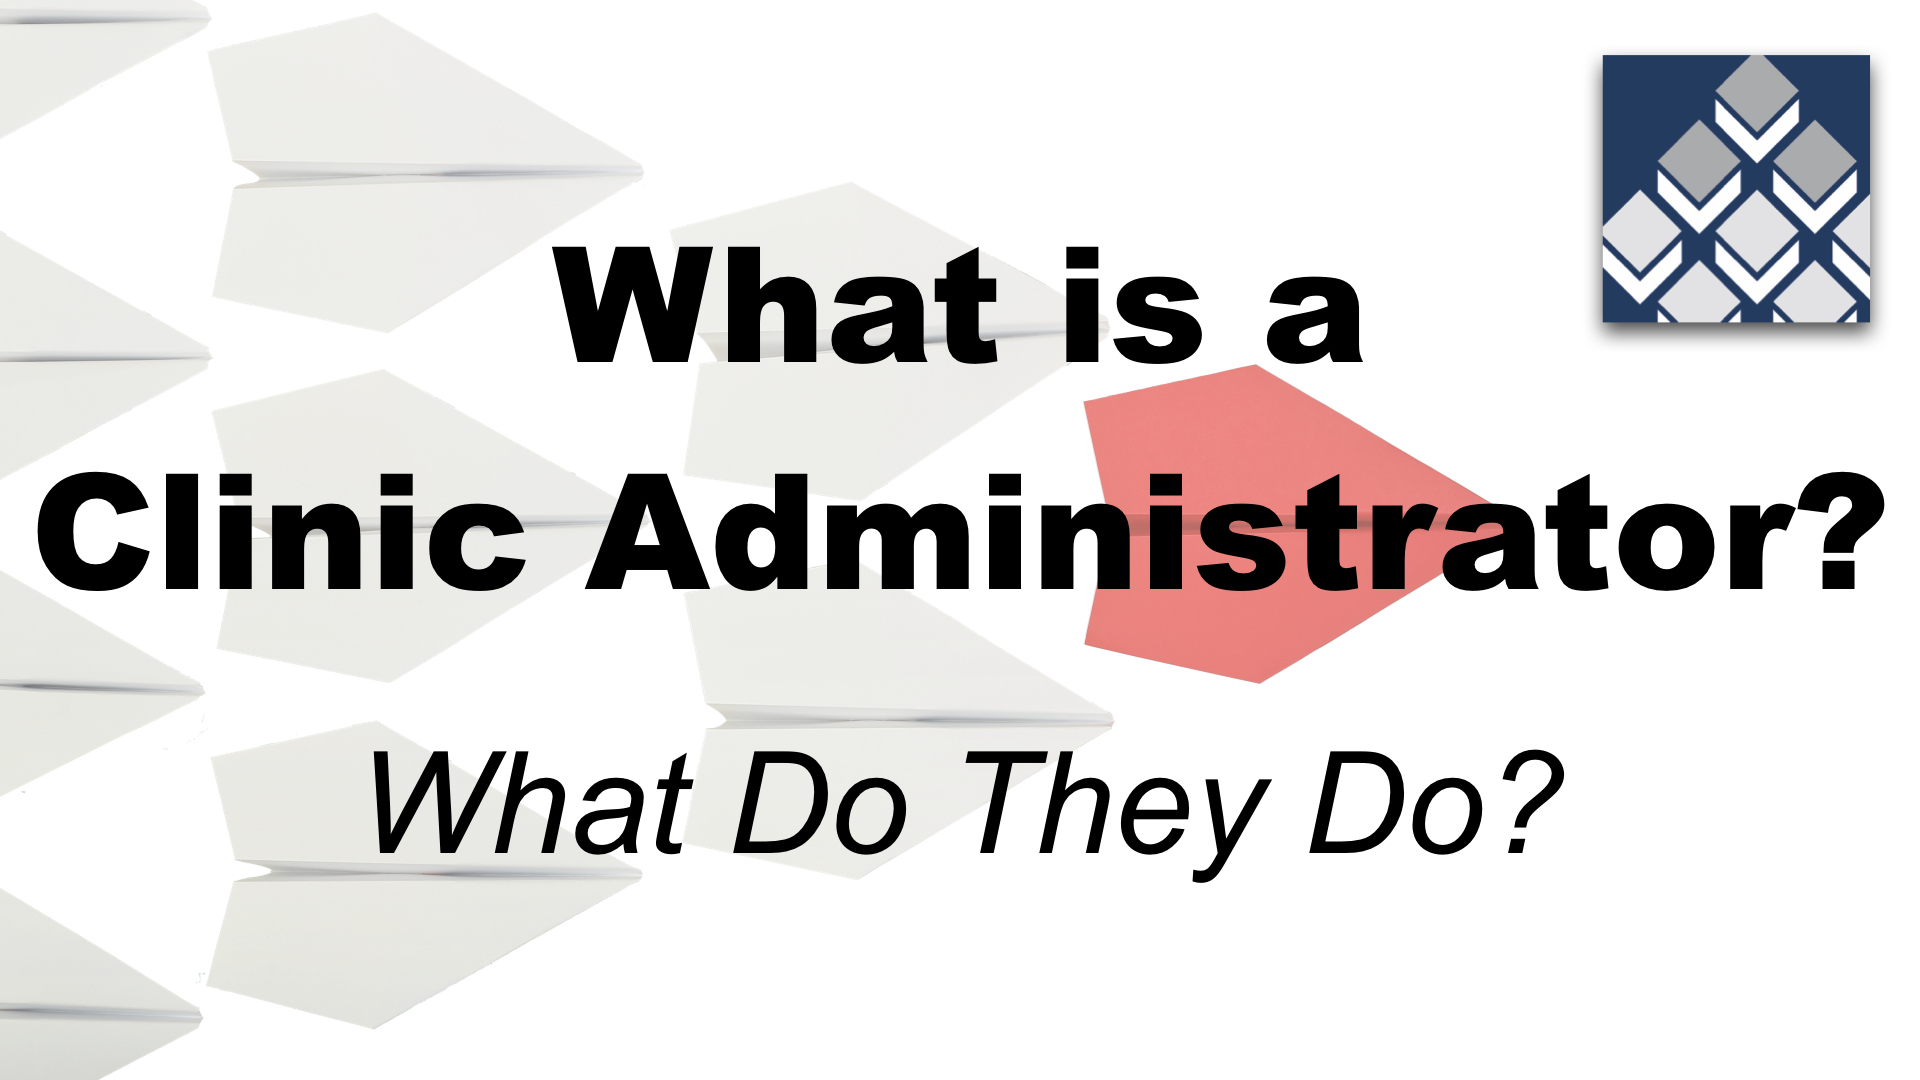 What is a Clinic Administrator?